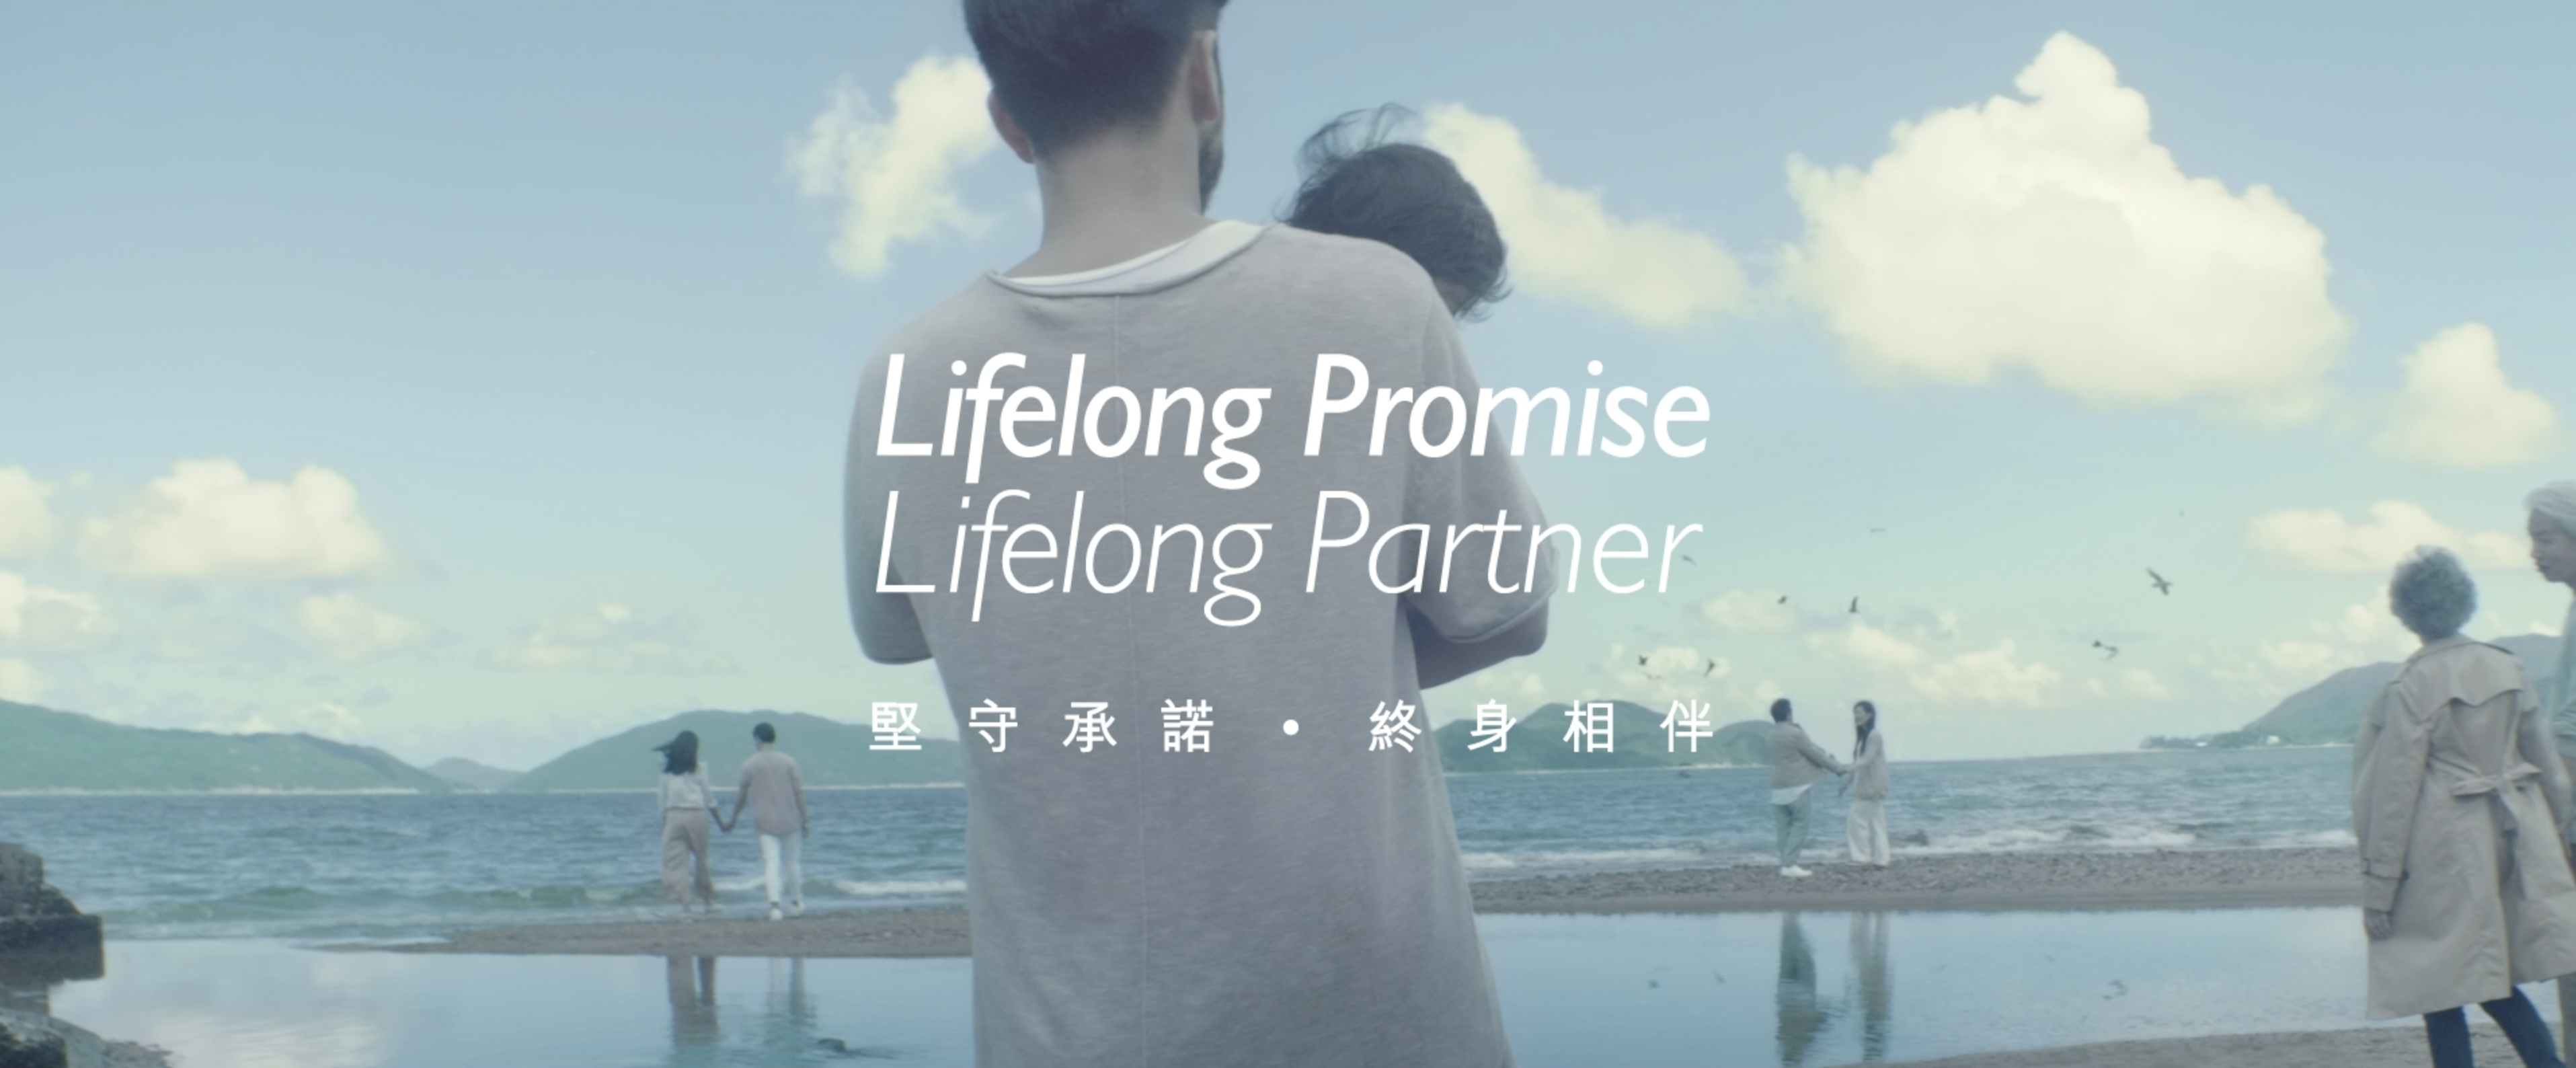 China Life (Overseas) Launches its Brand TV Campaign